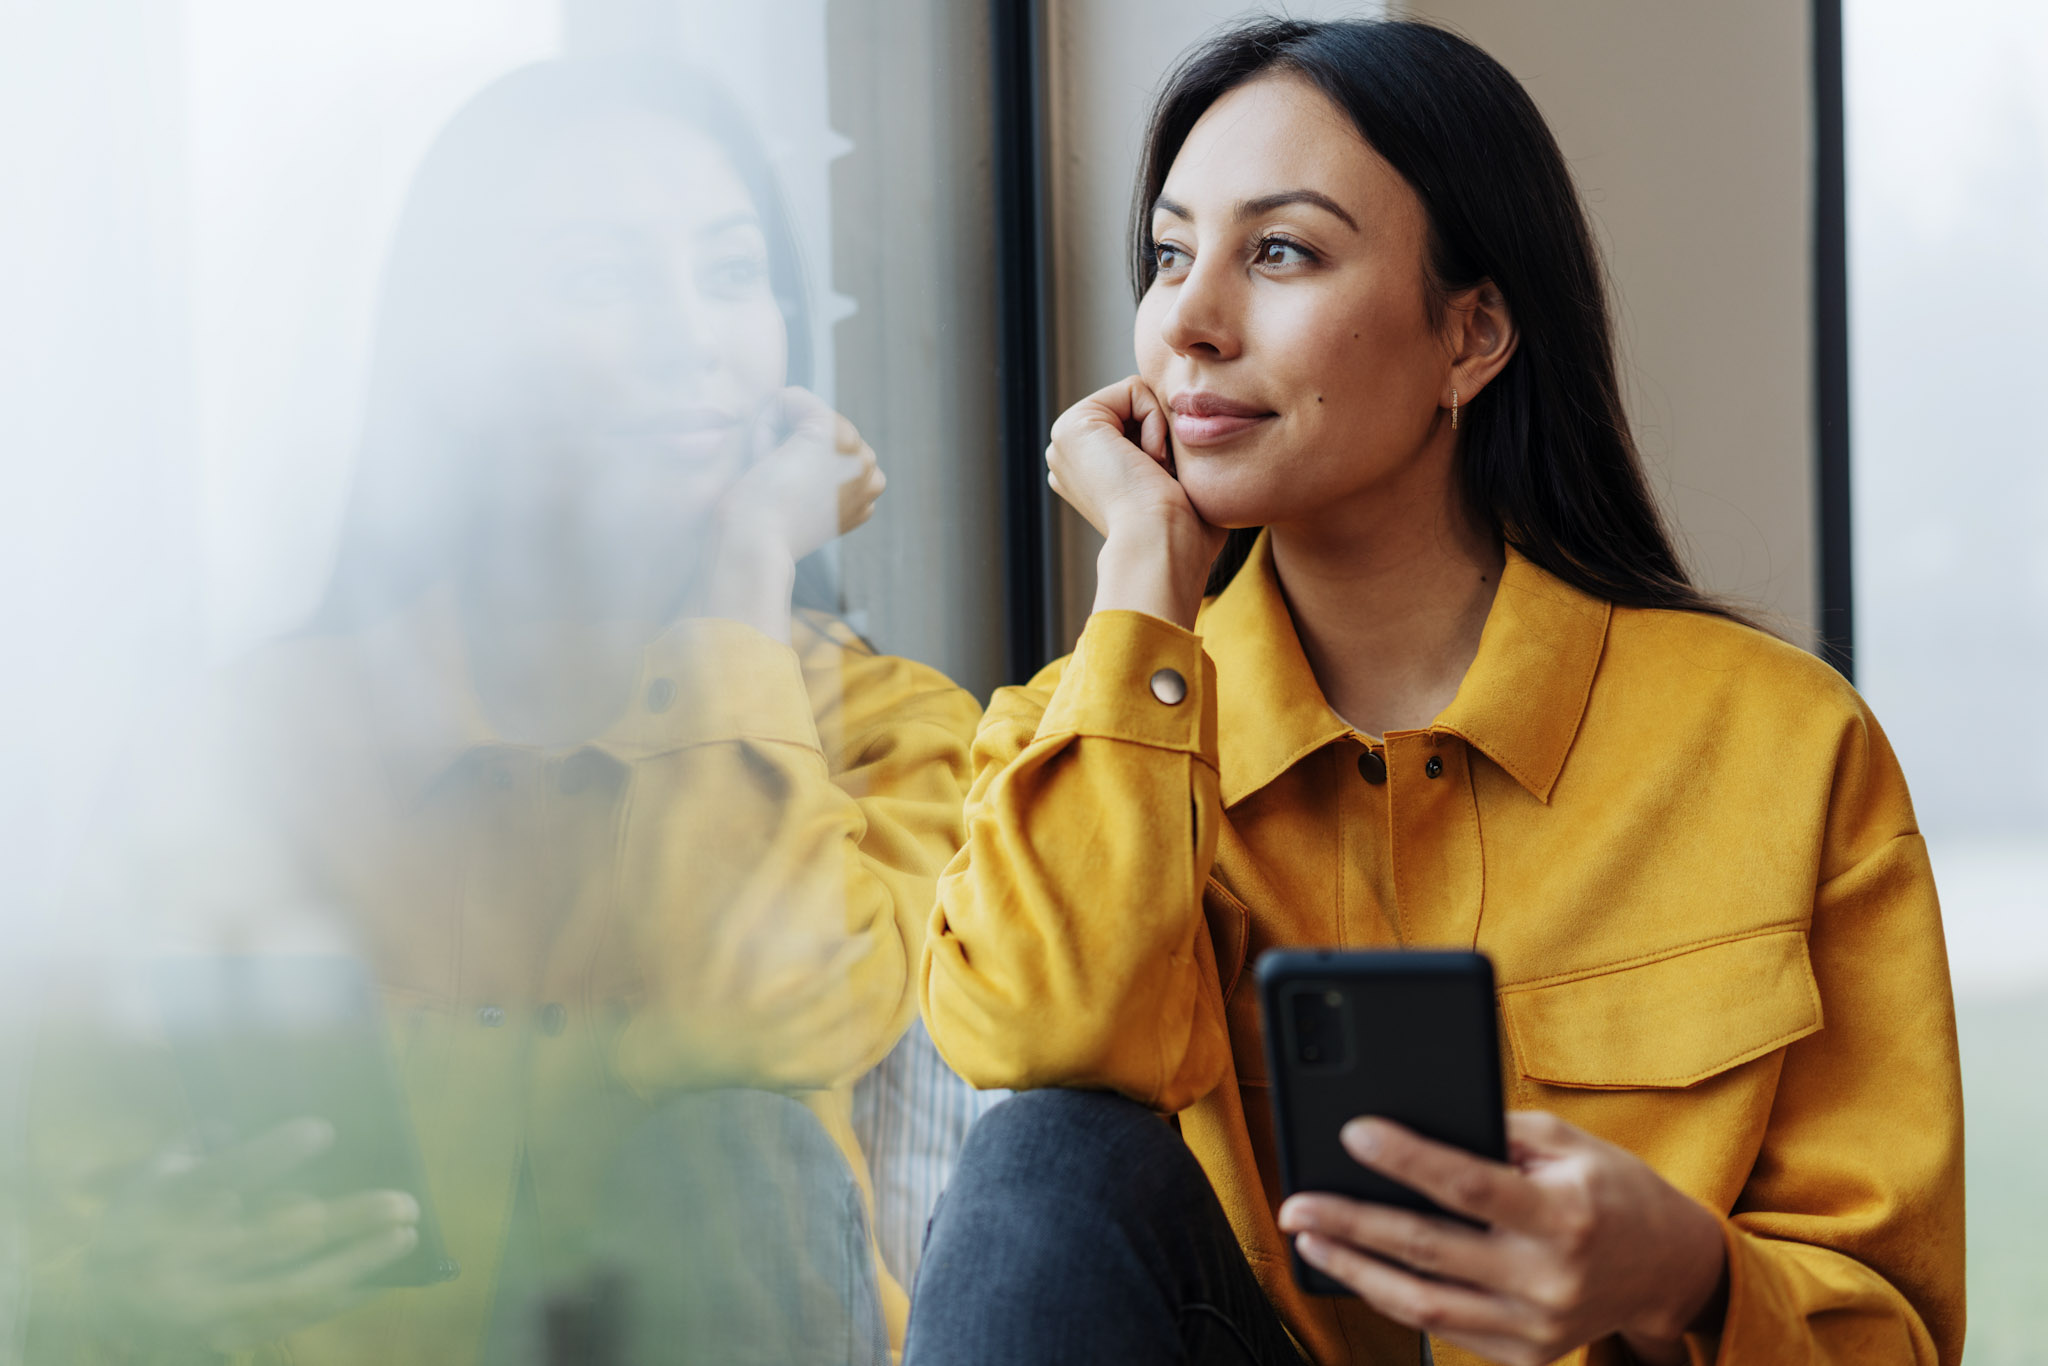 stock image of a woman looking wistfully out of a window with a smartphone in her hand